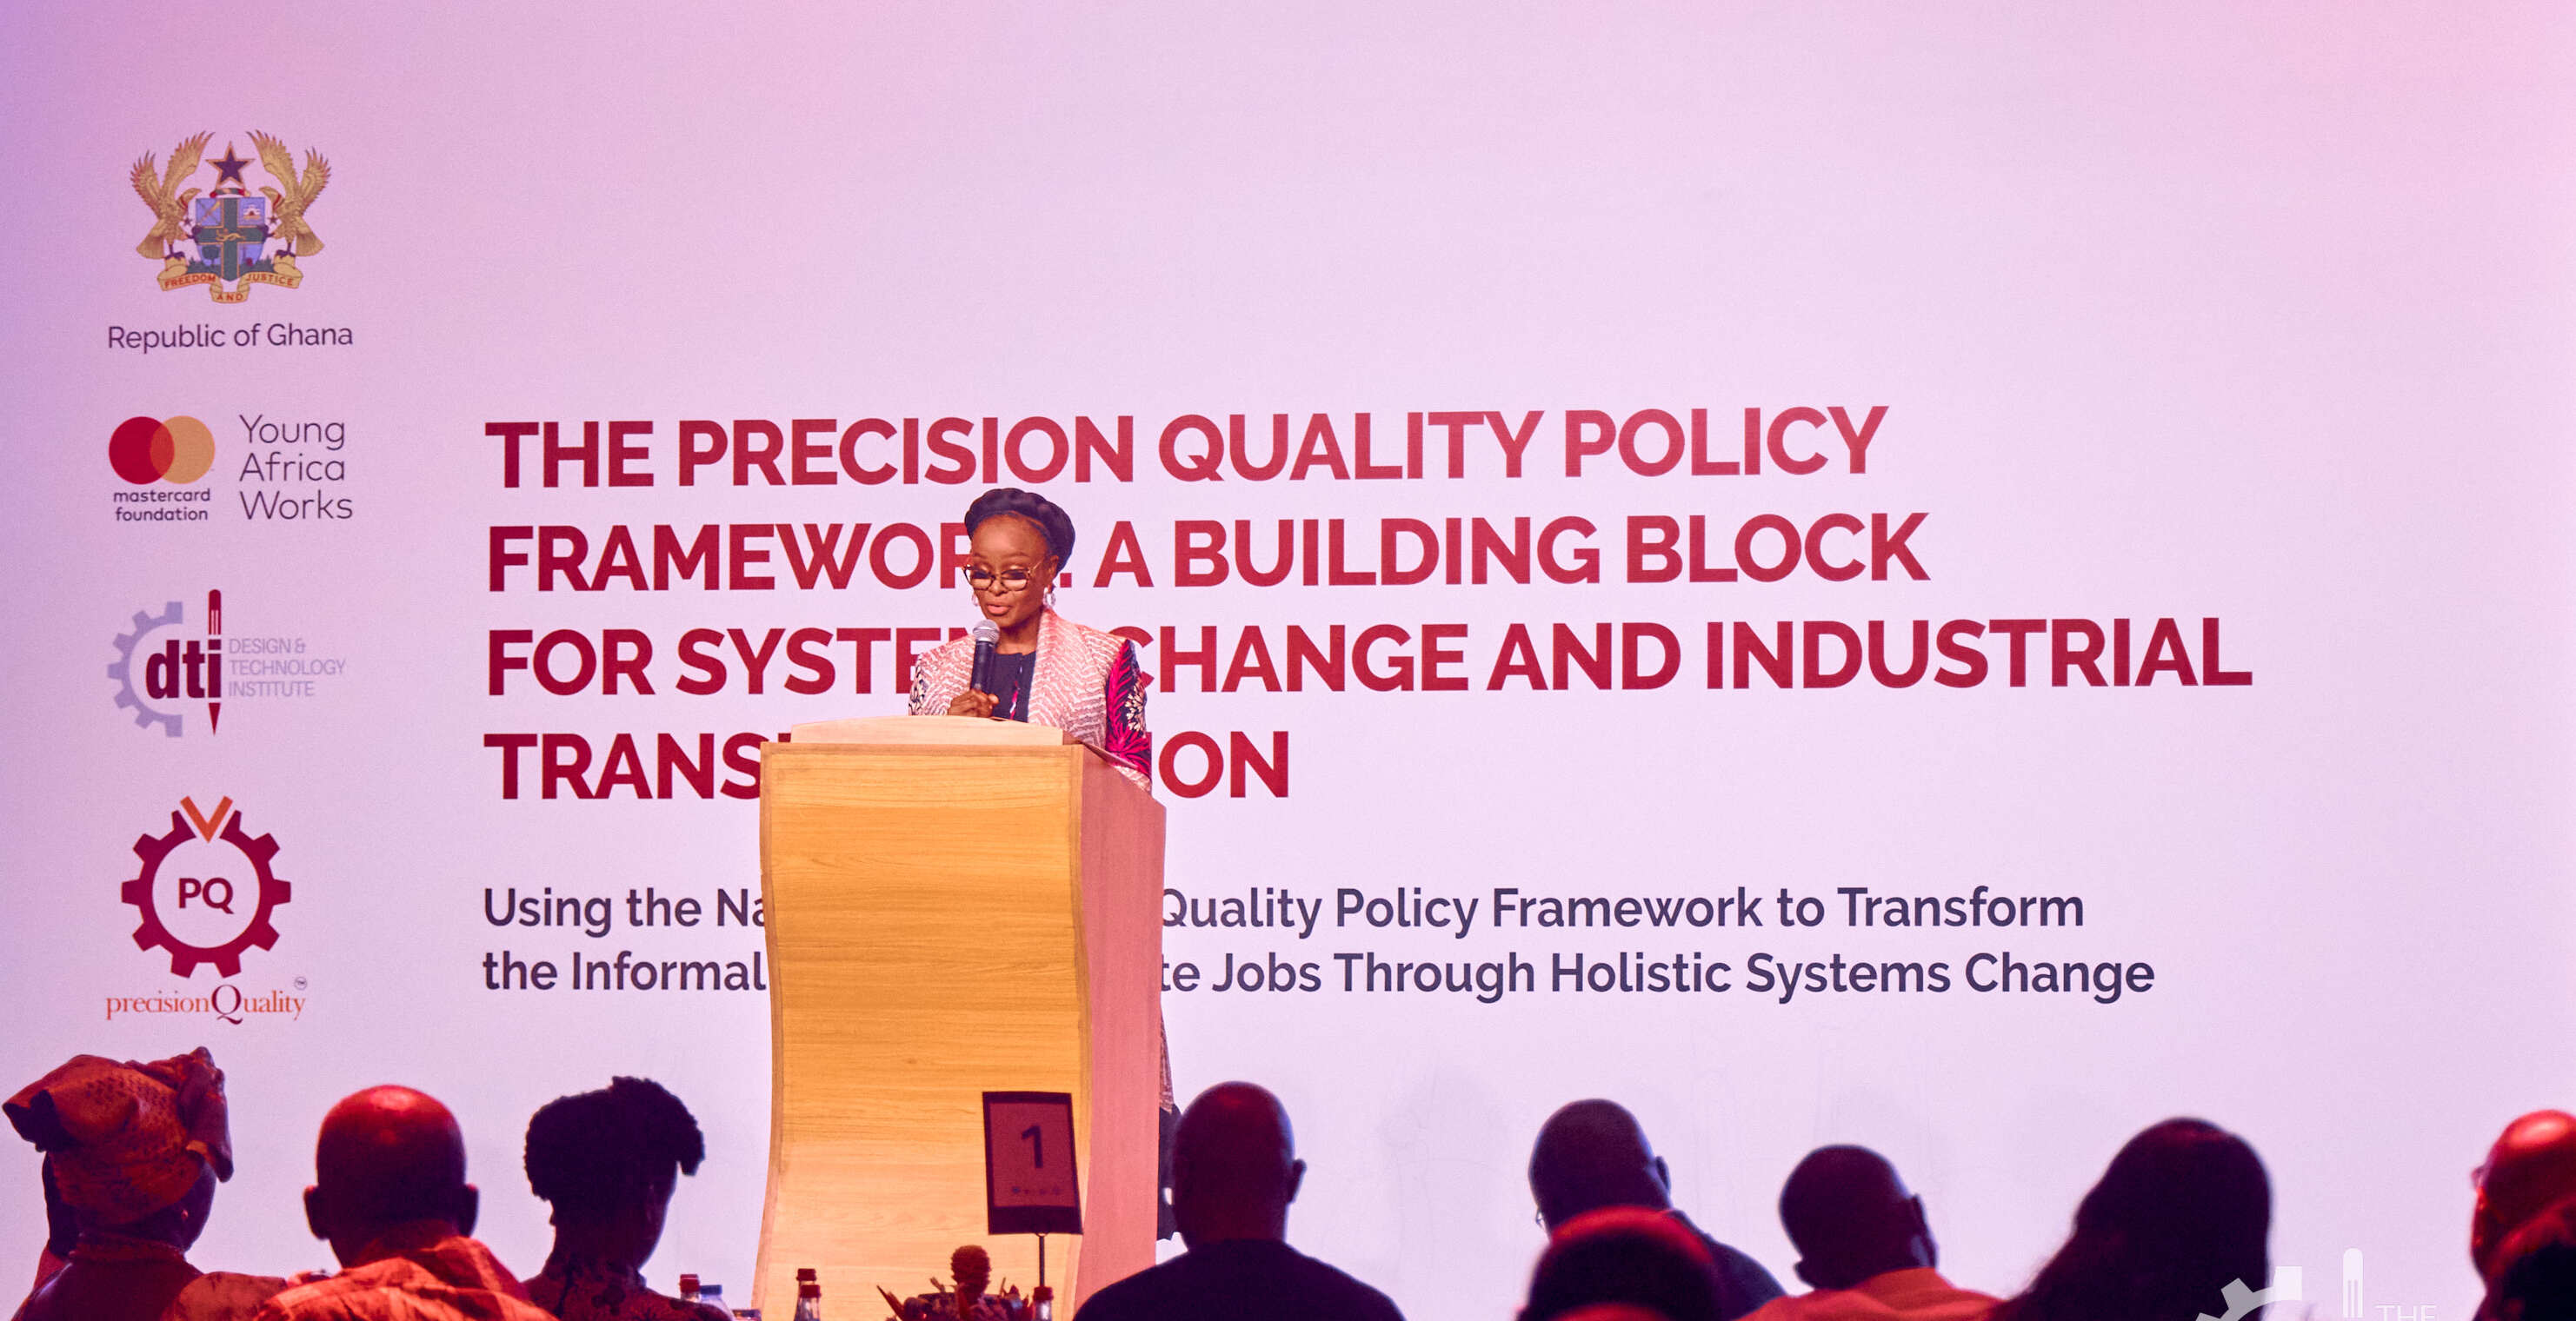 4TH NATIONAL PRECISION QUALITY CONFERENCE TO DELIBERATE ON LABOUR MARKET INFORMATION SYSTEMS FOR JOB CREATION